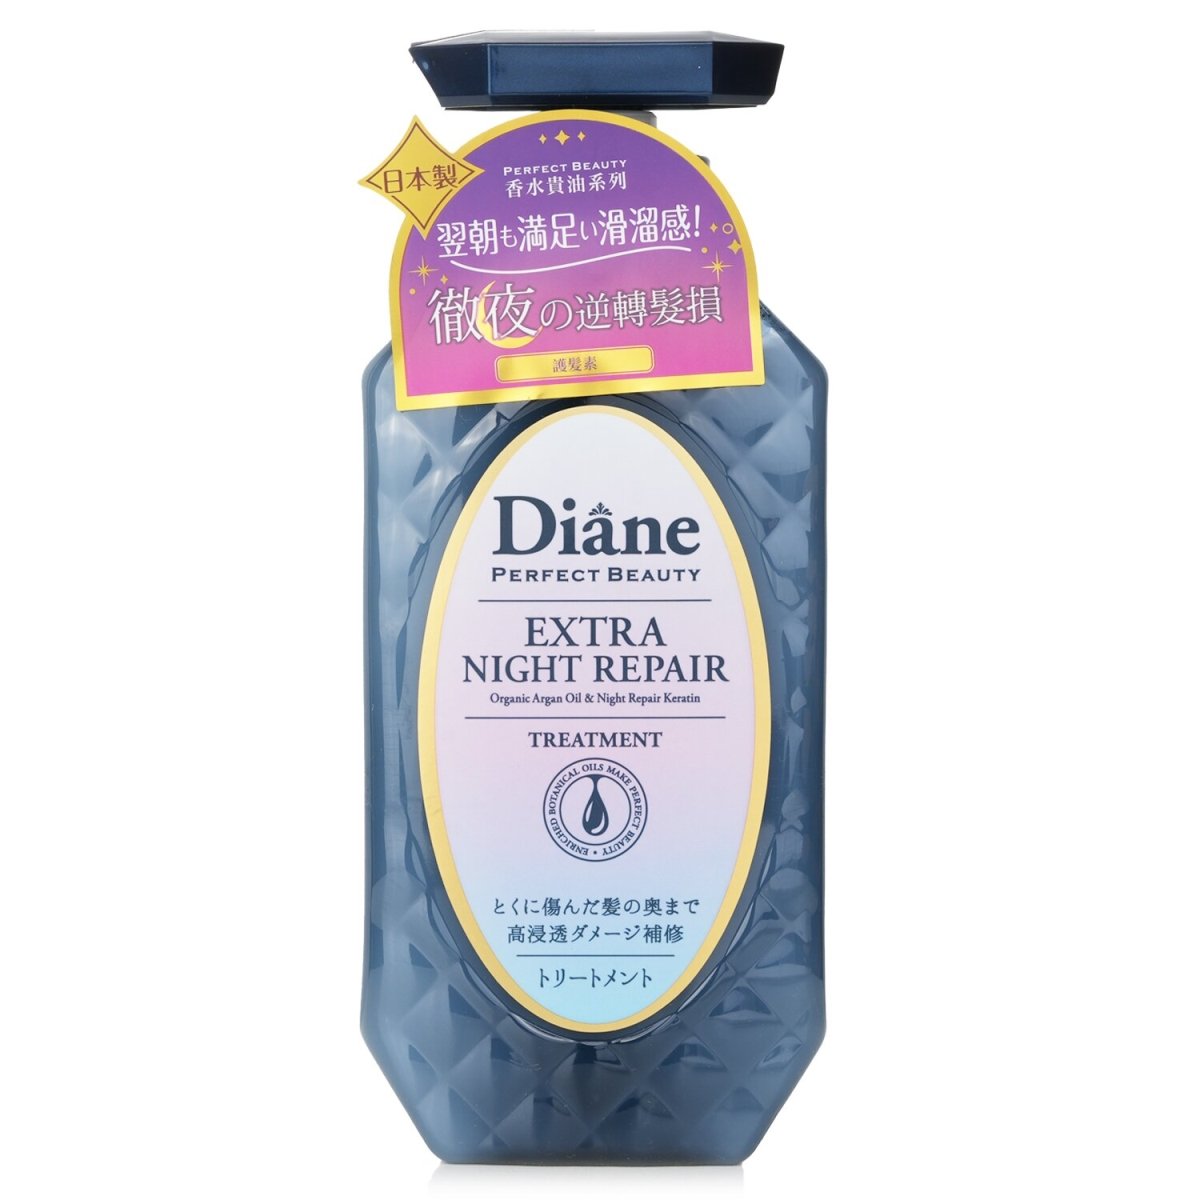 Picture of Moist Diane 308758 450 ml Perfect Beauty Extra Night Repair Treatment